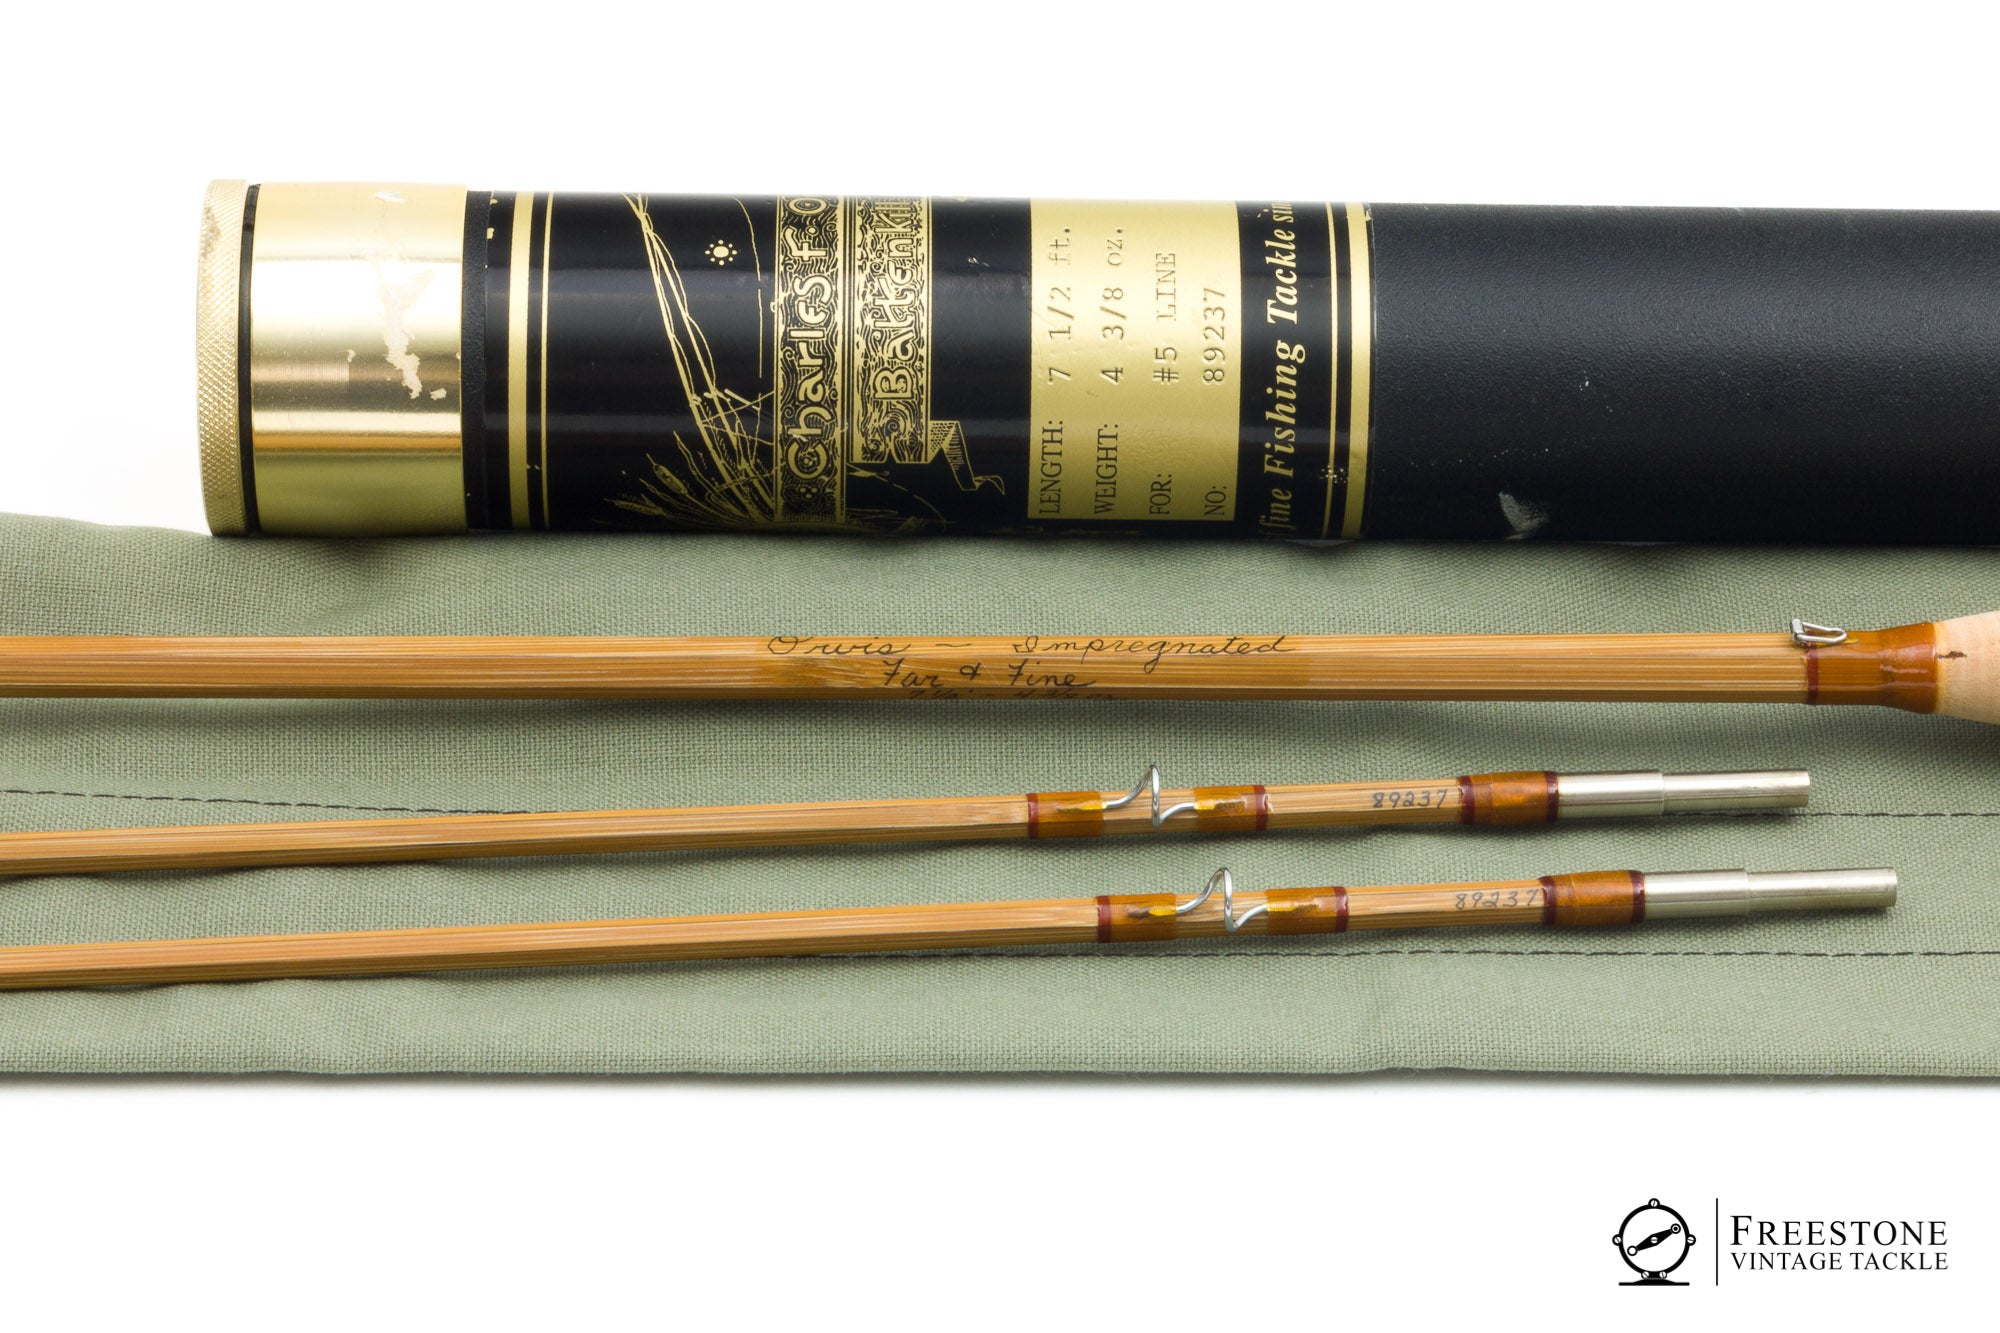 VINTAGE ORVIS BAMBOO Fishing Rod 7'6” 4piece $104.37 - PicClick